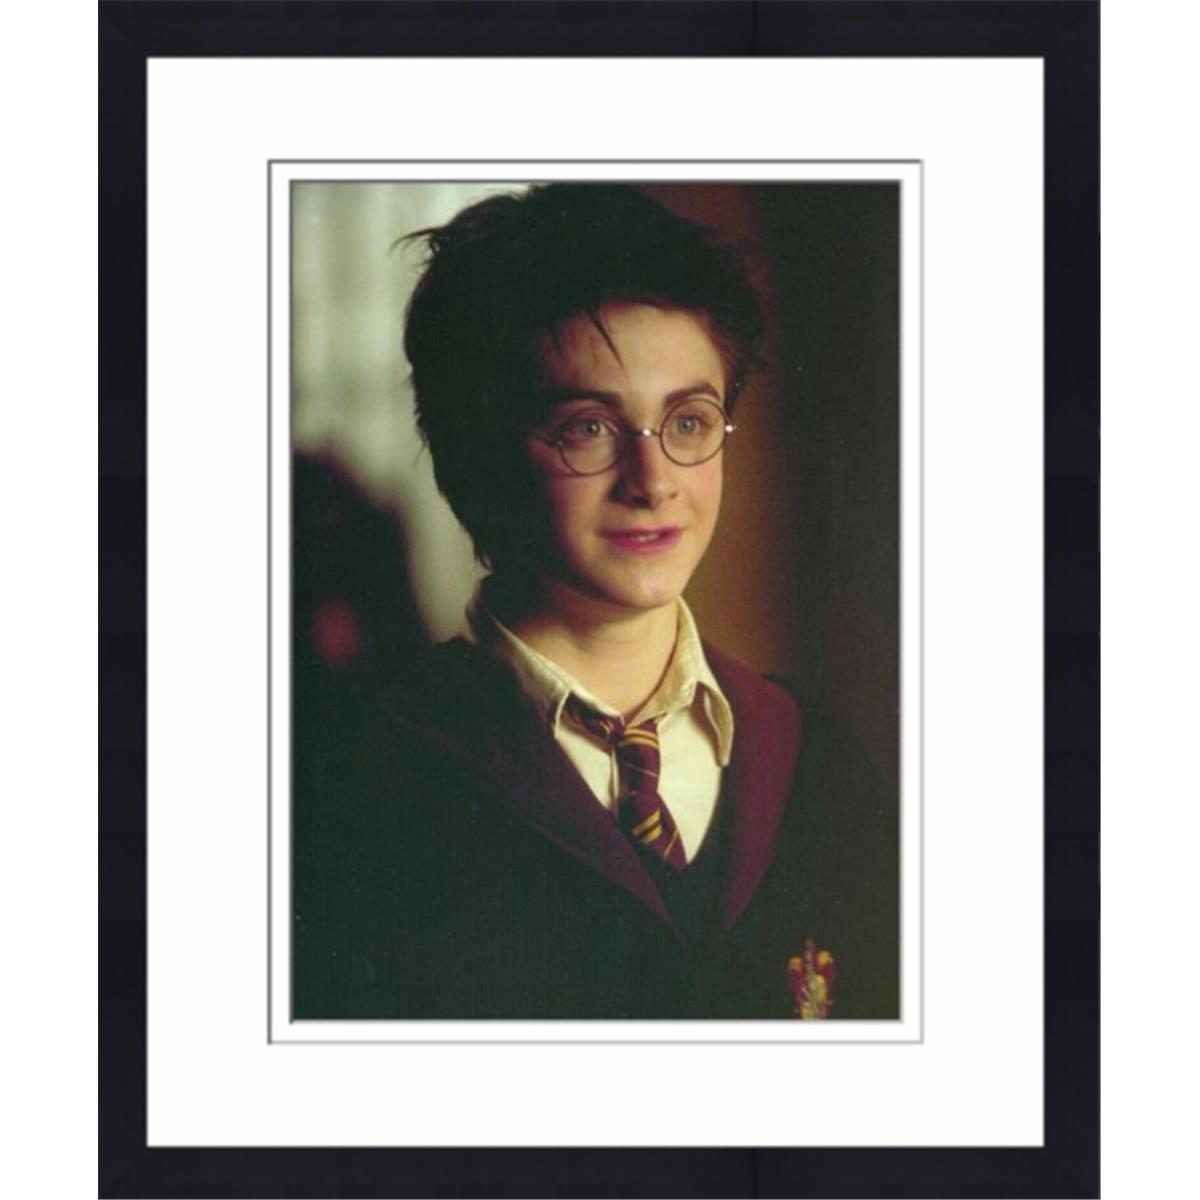 559847 8 x 10 in. Daniel Radcliffe Matted & Framed Photo - Harry Potter No.8 -  Autograph Warehouse